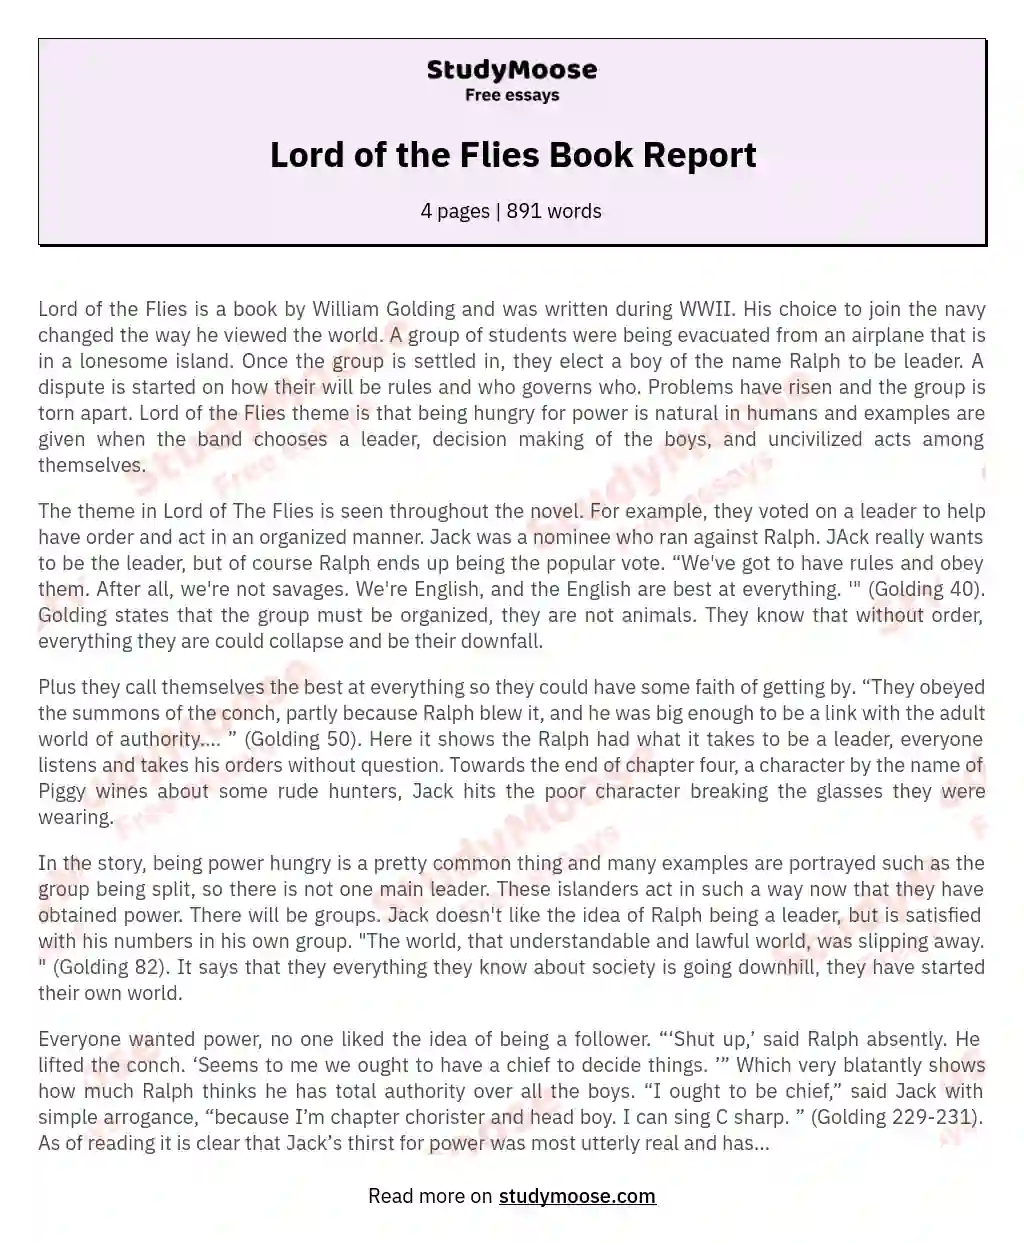 Lord of the Flies Book Report essay